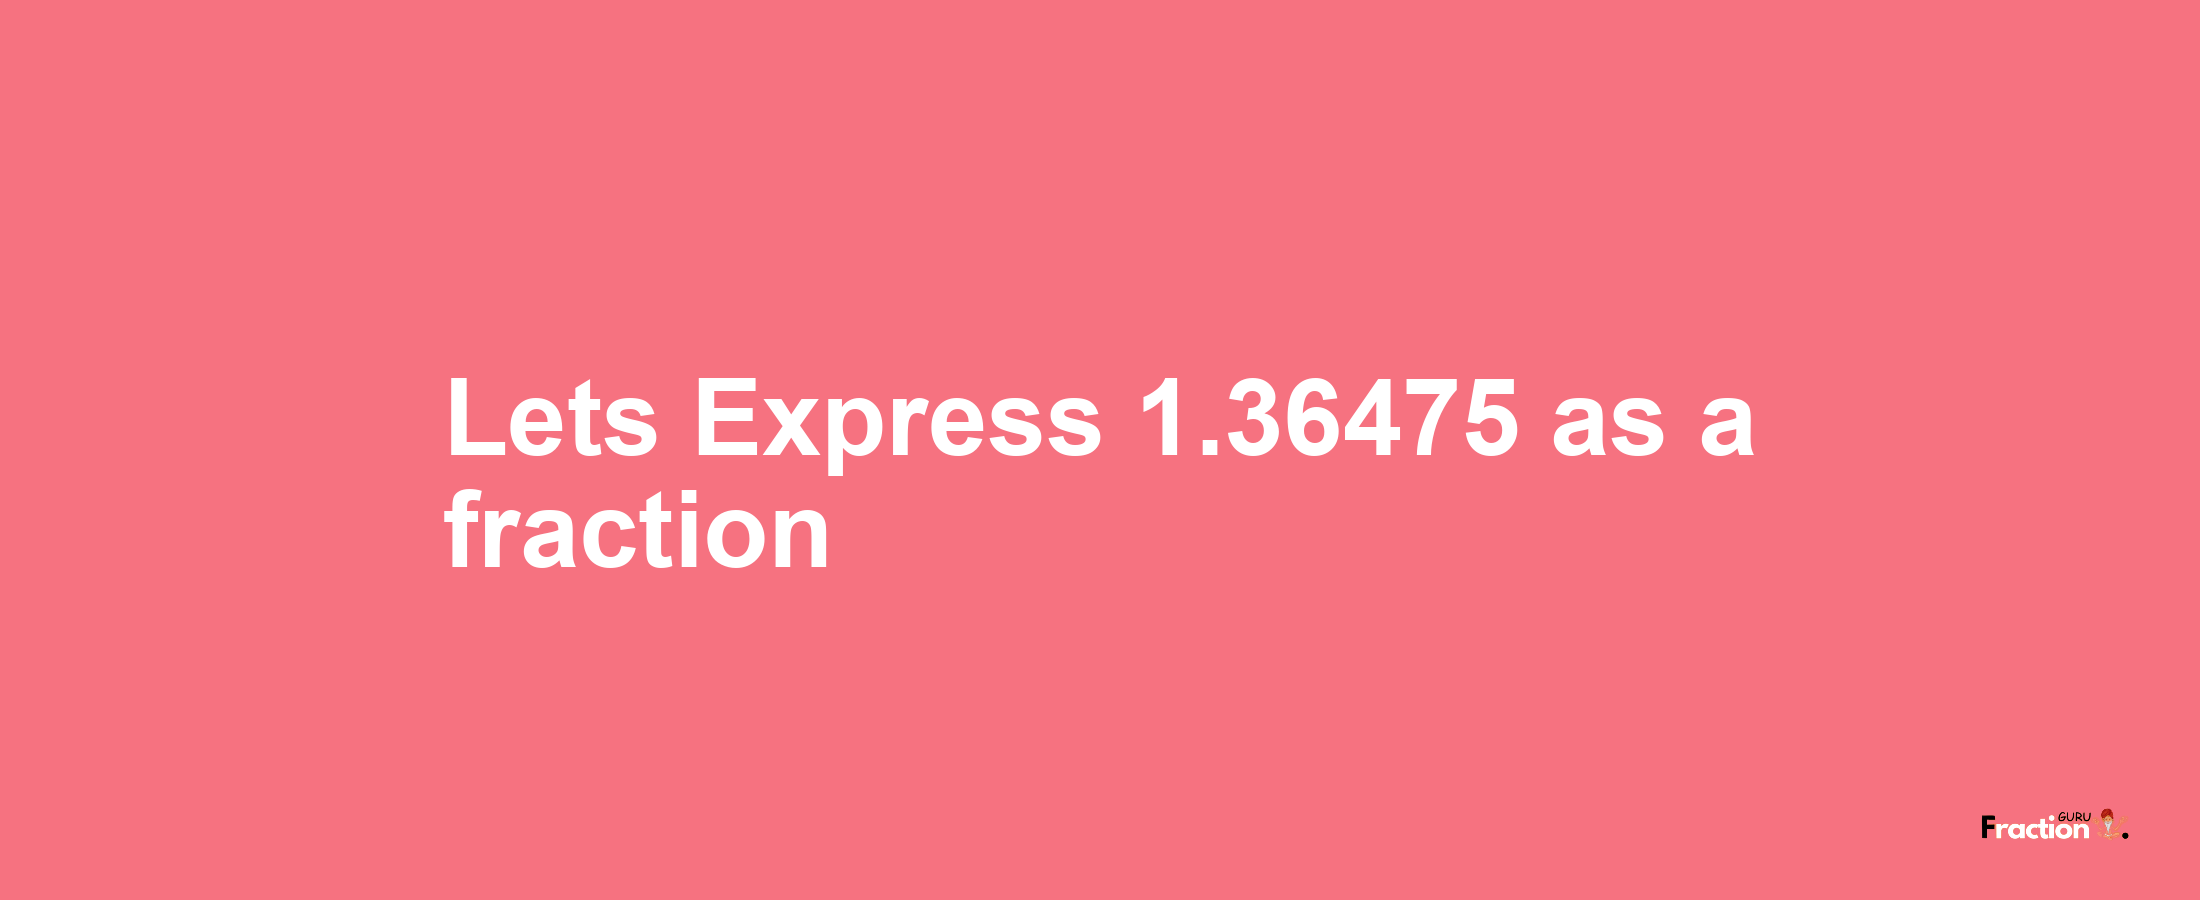 Lets Express 1.36475 as afraction